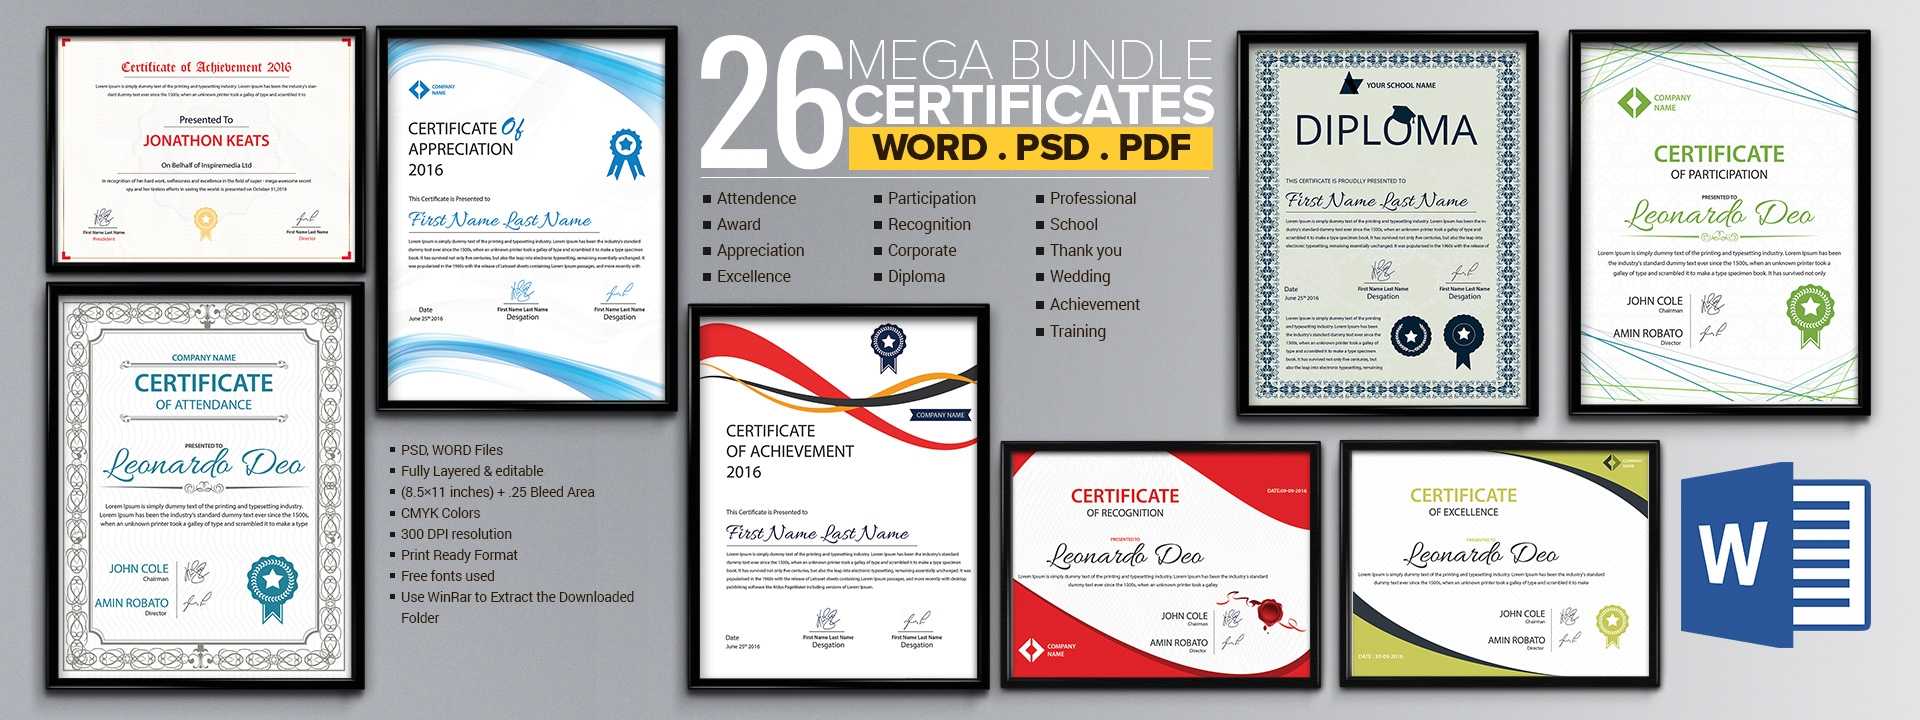 Word Certificate Template - 53+ Free Download Samples Throughout Microsoft Office Certificate Templates Free